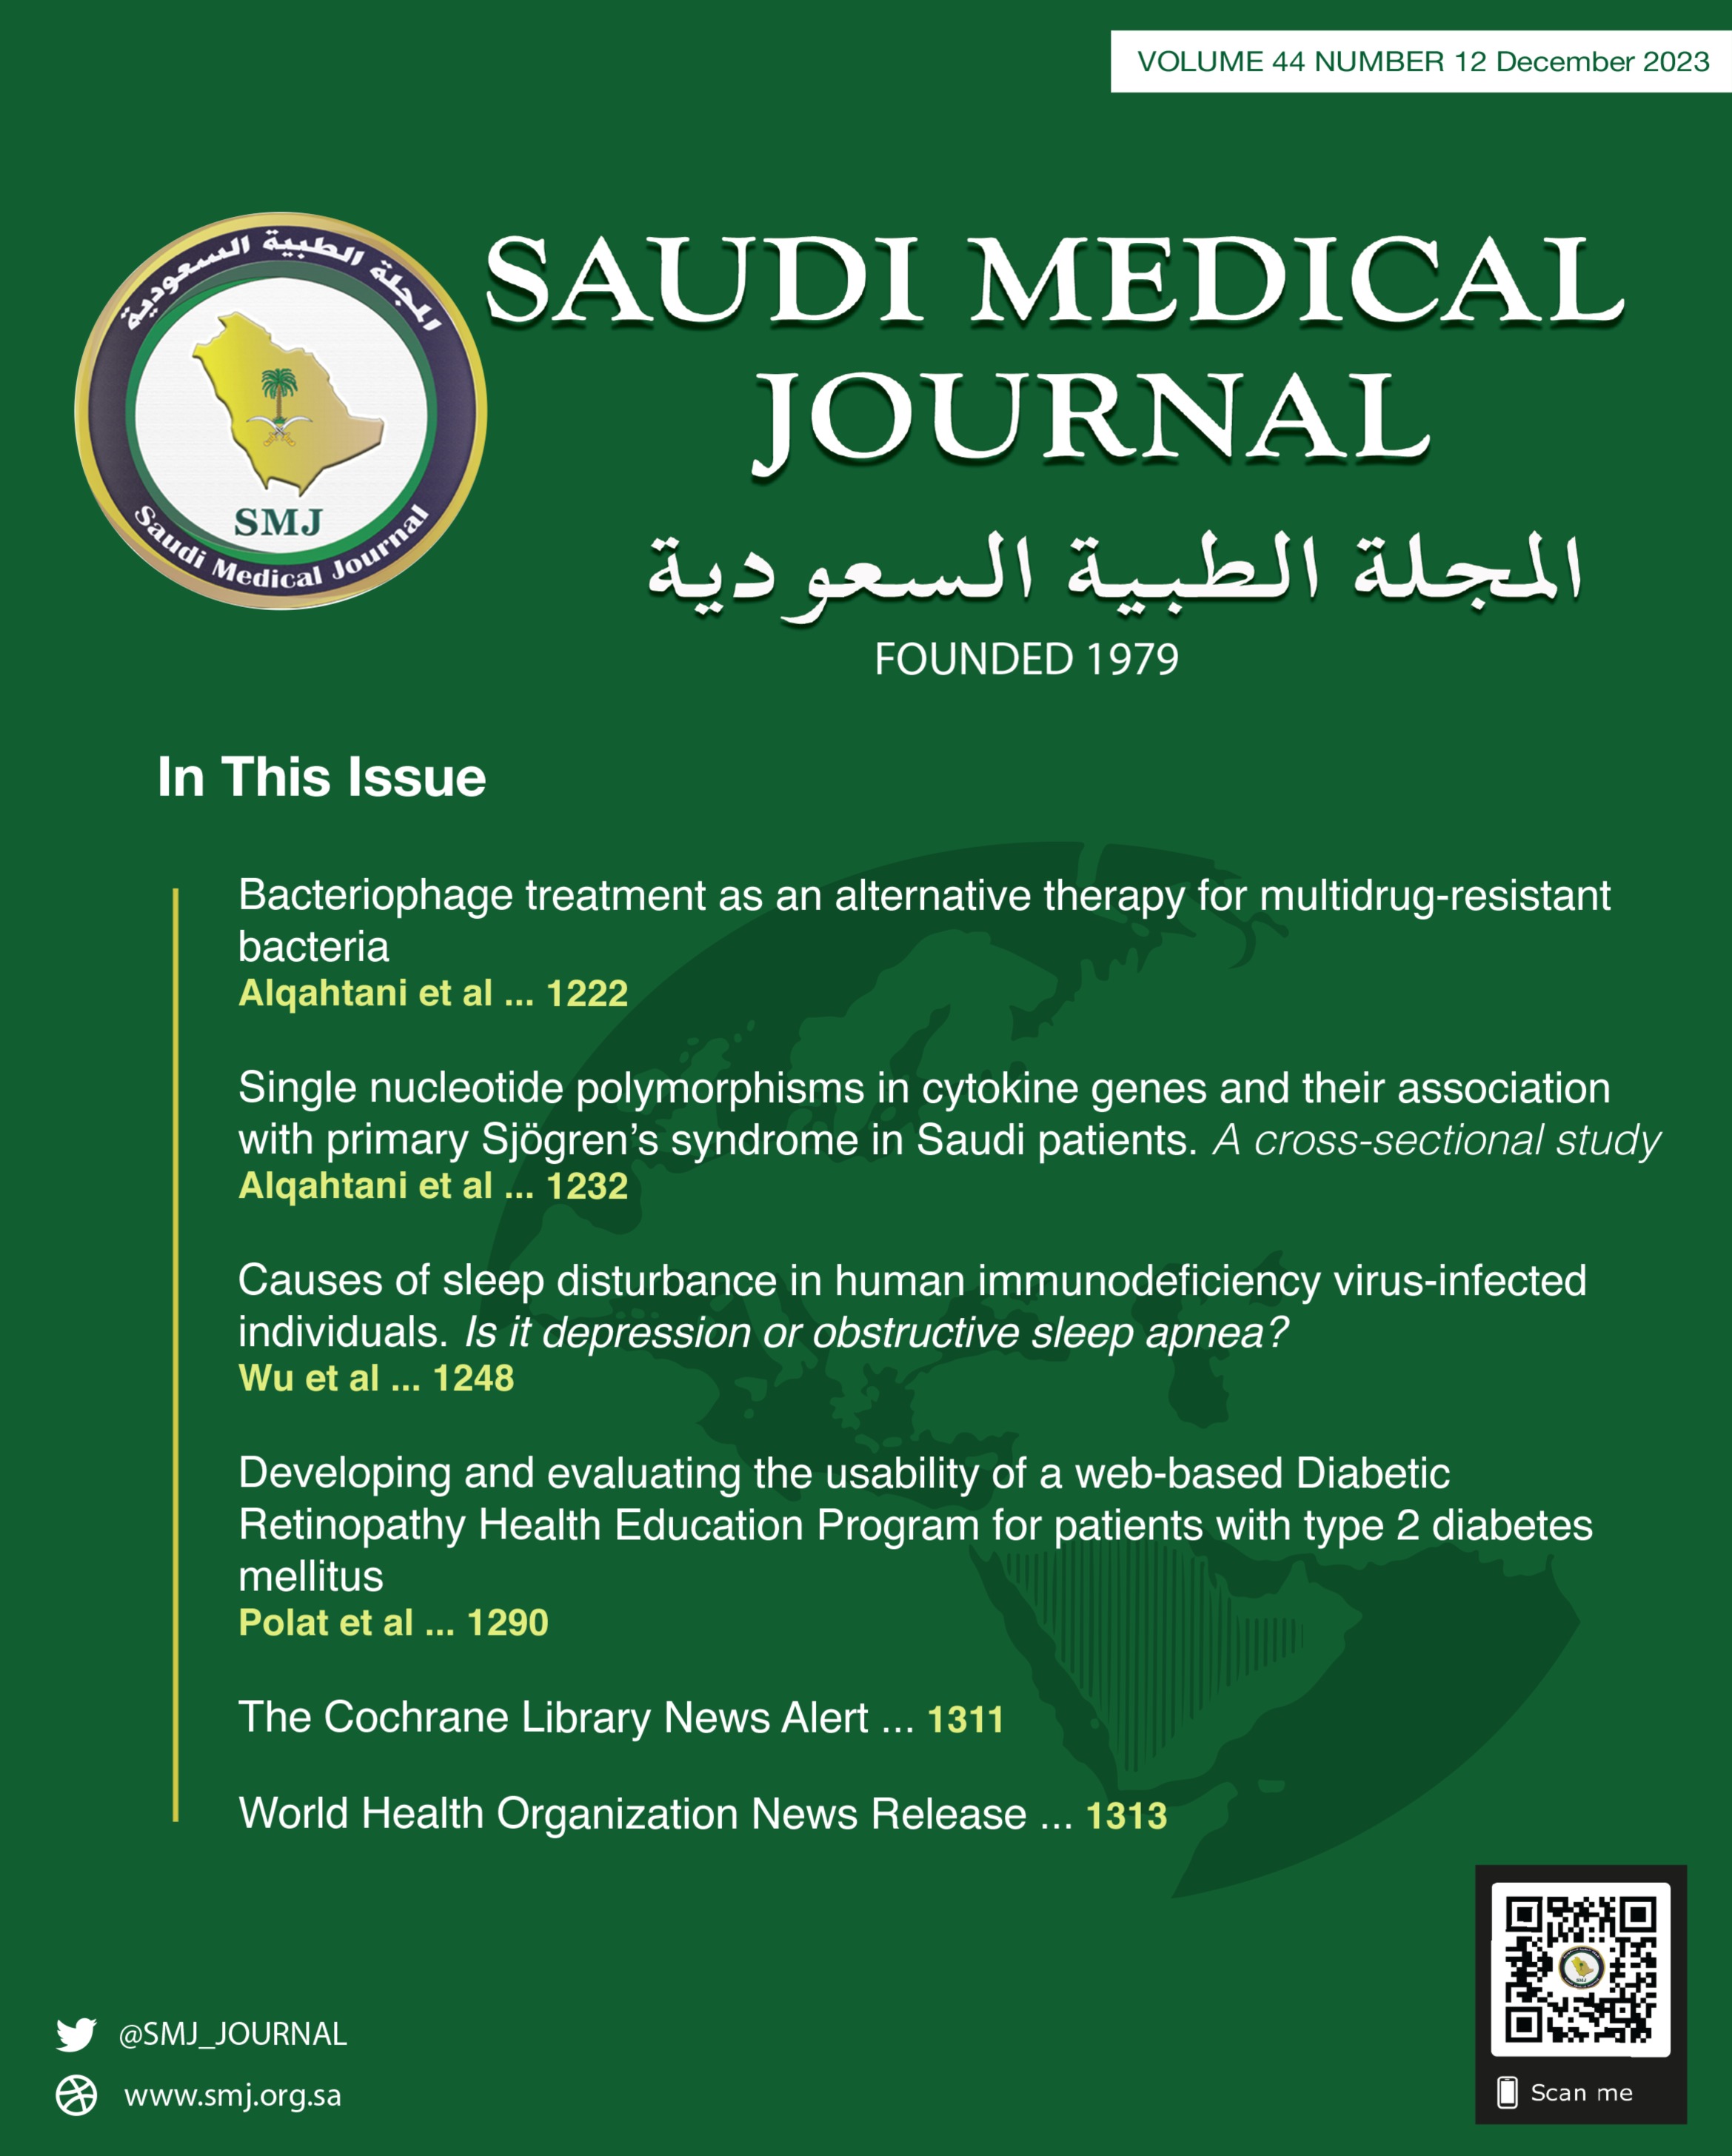 Normative optical coherence tomography reference ranges of the optic nerve head, nerve fiber layer, and macula in healthy Saudi children